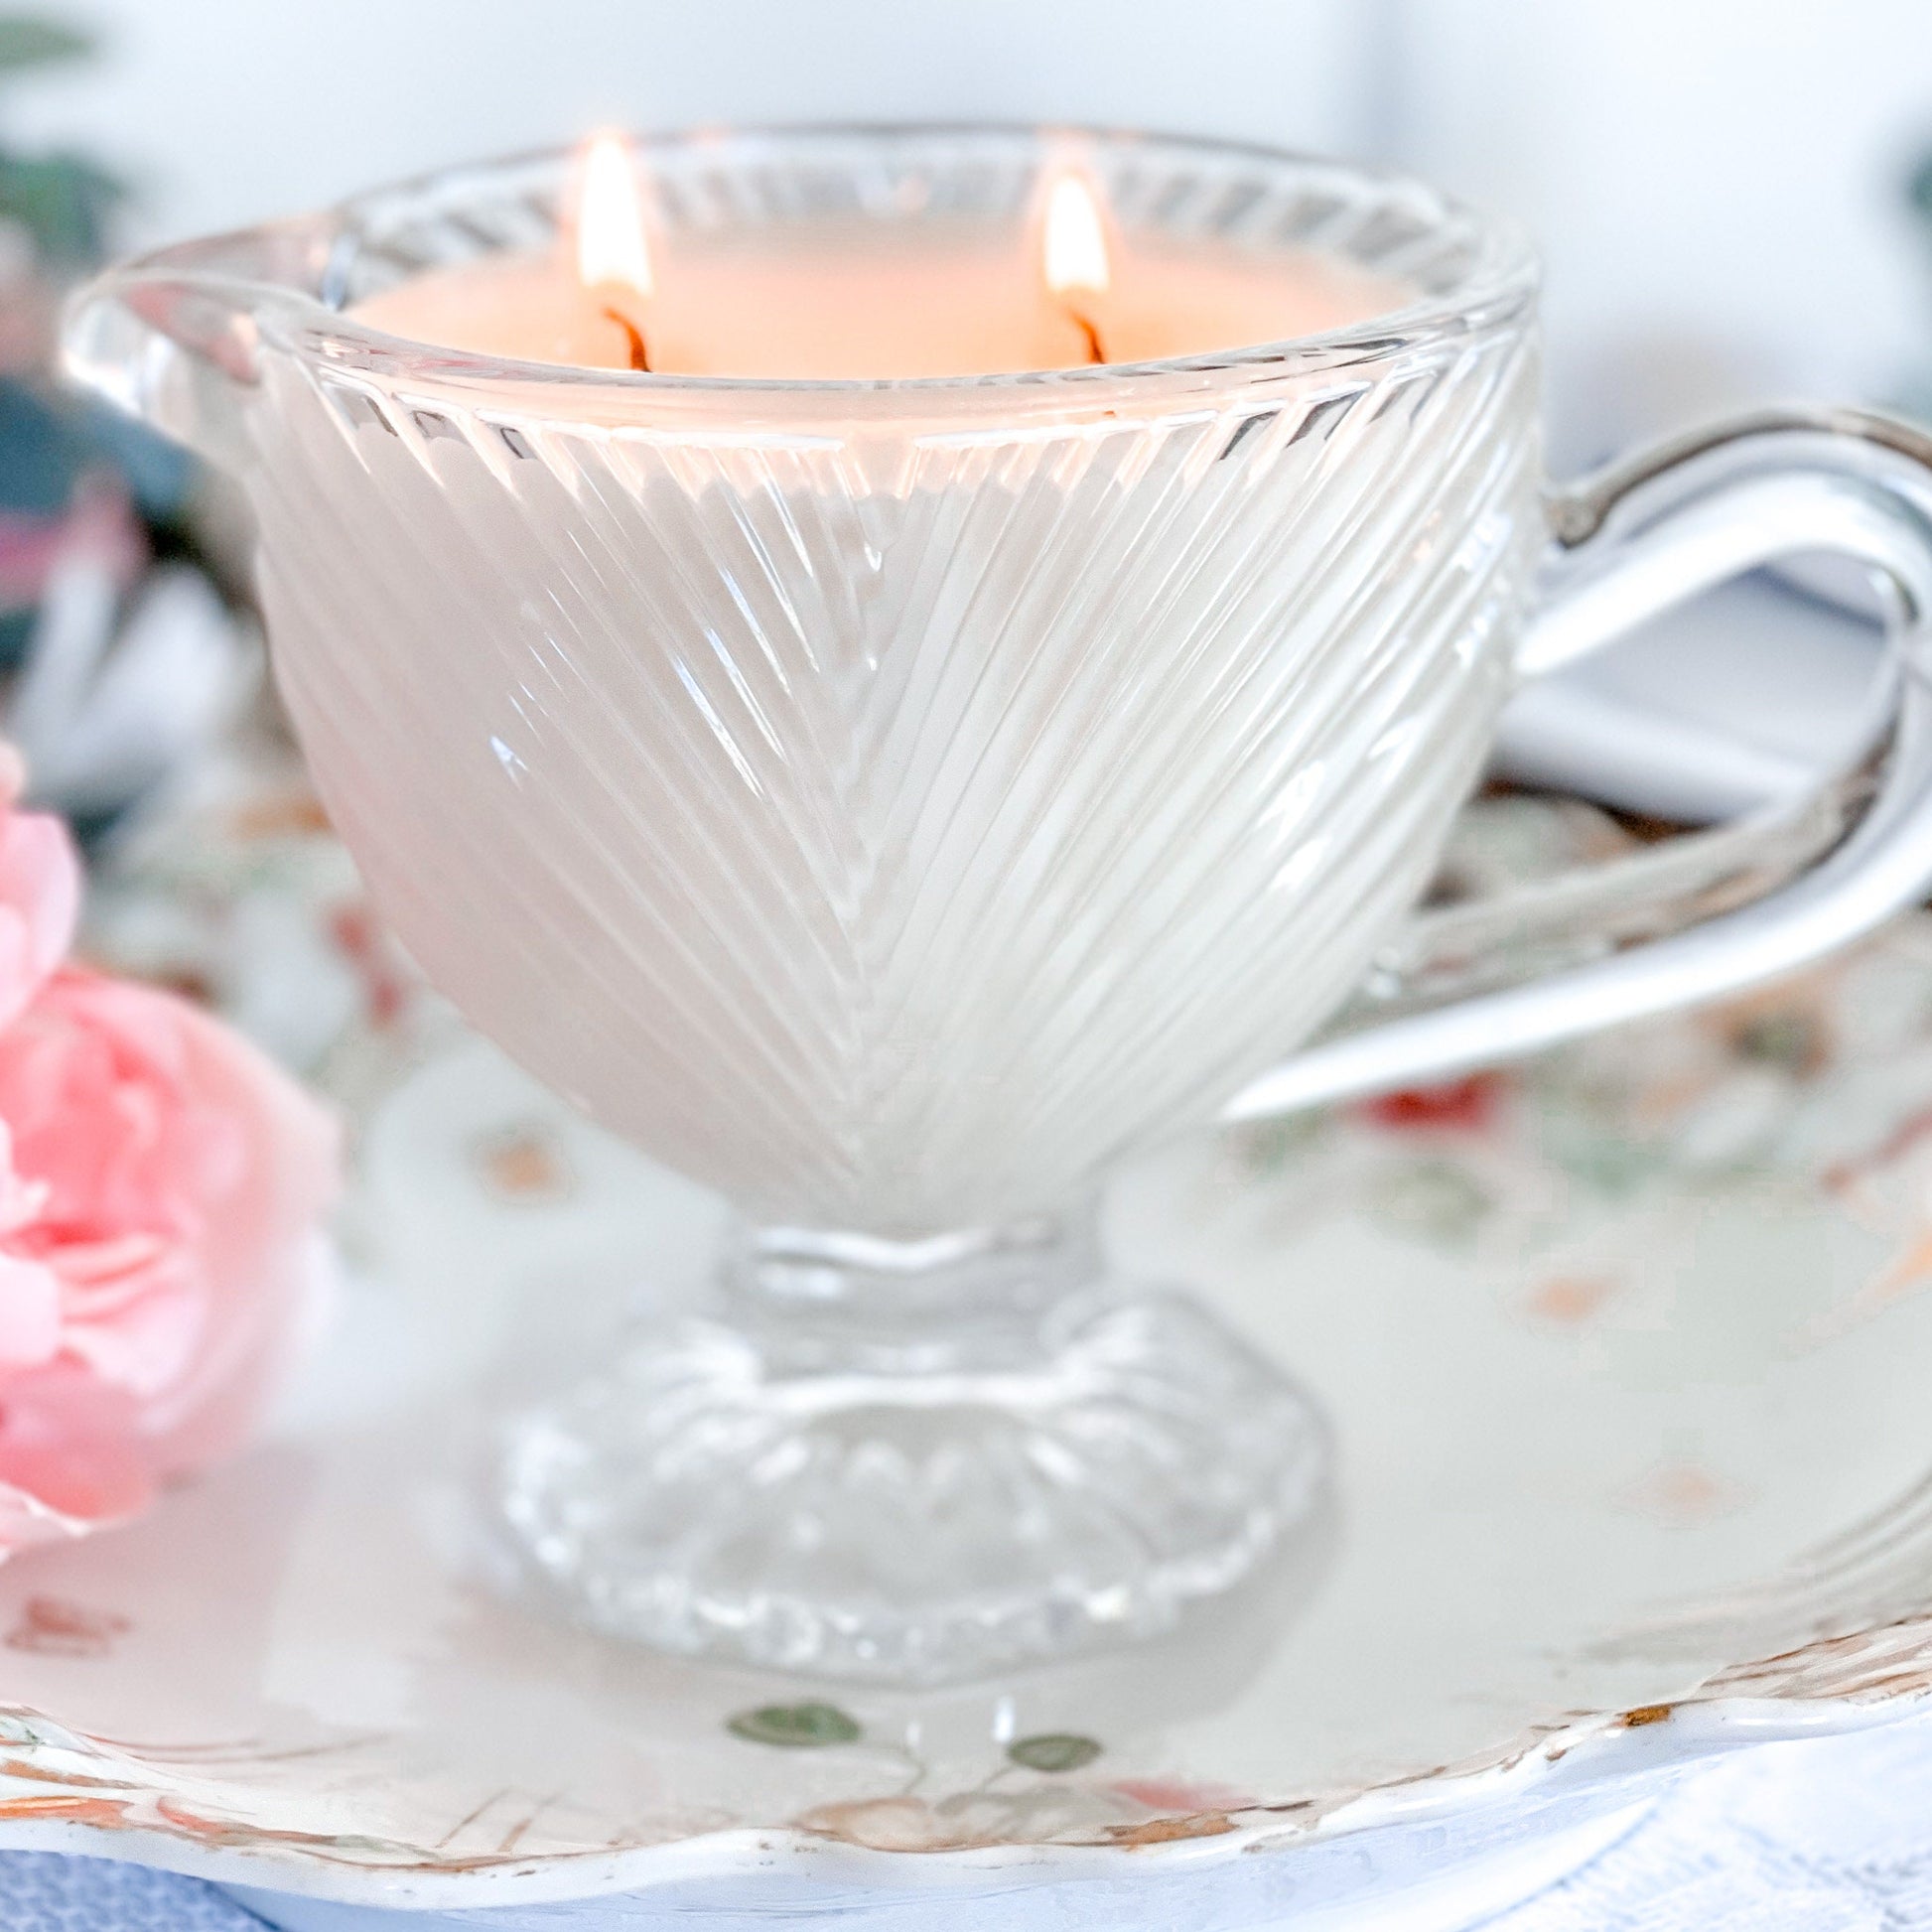 Handmade Candle in Vintage Glass Creamer